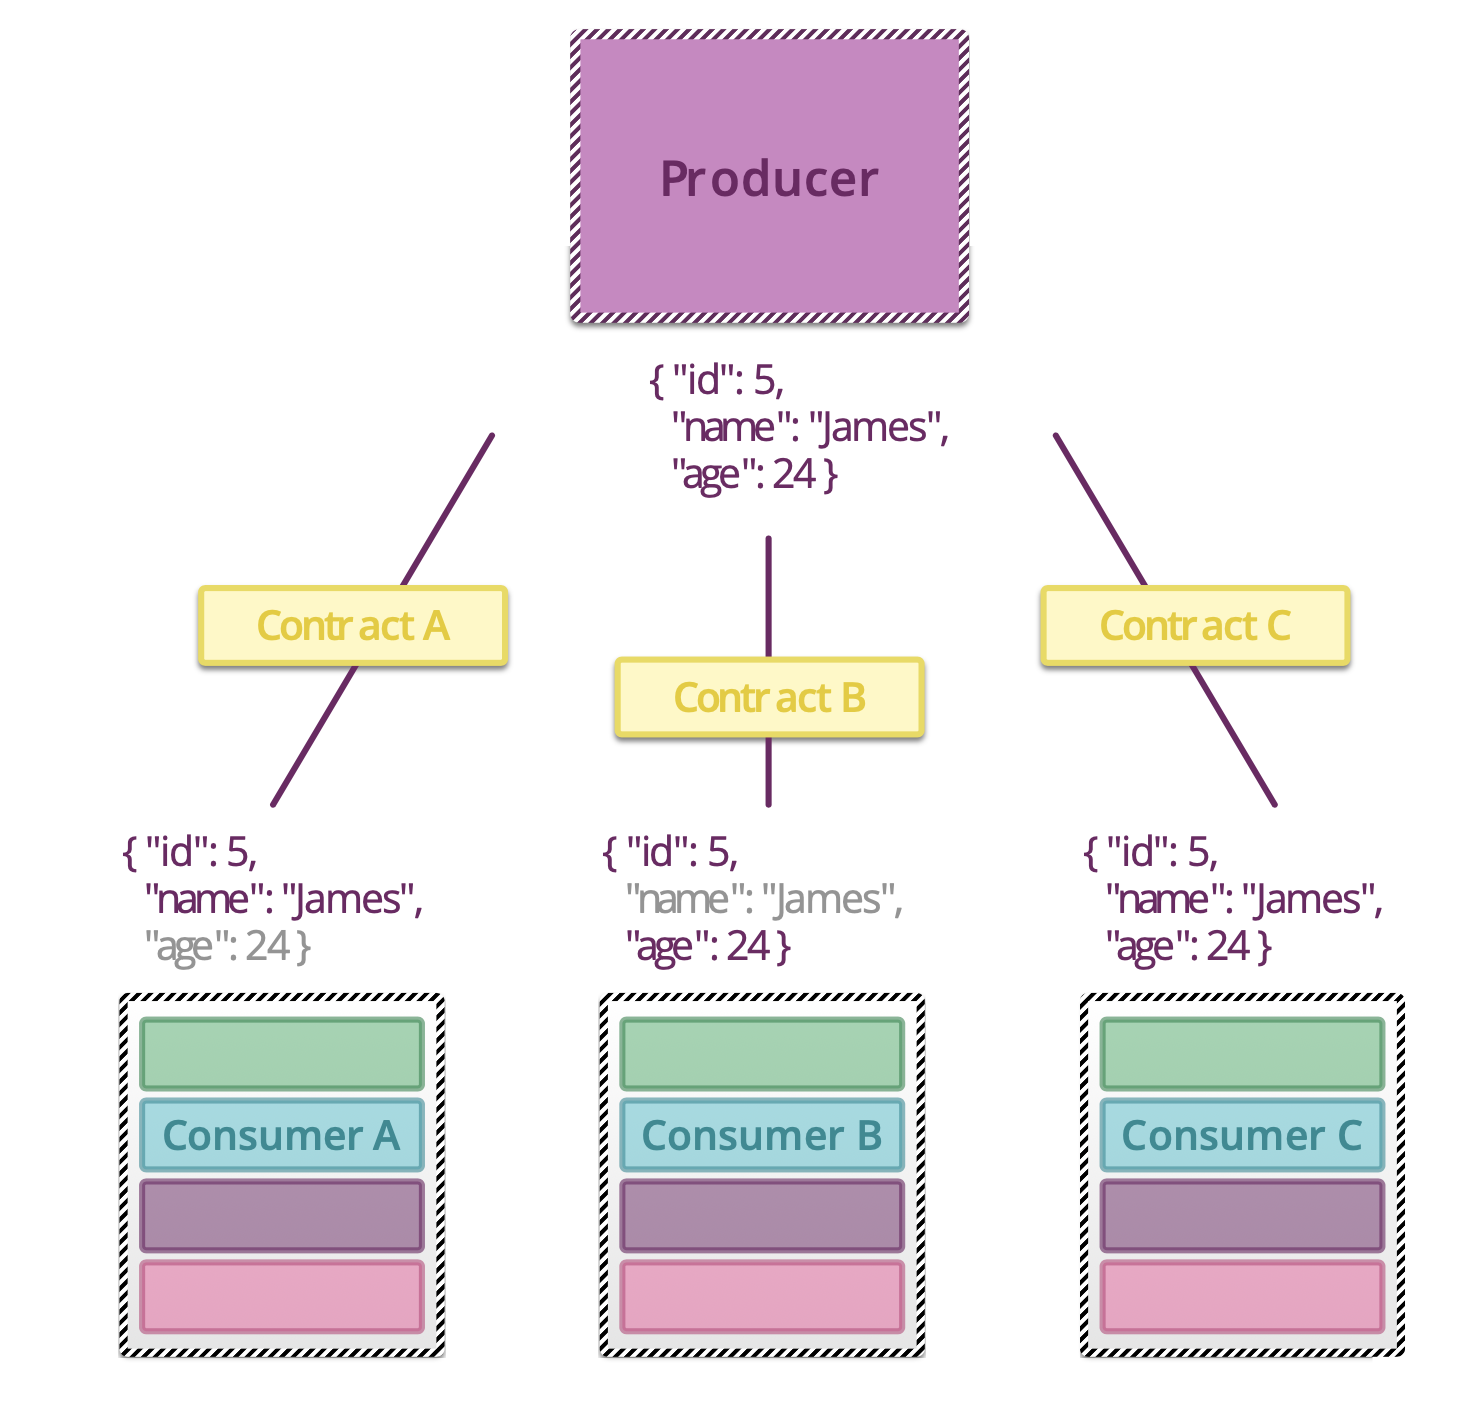 ../../_images/testing-microservices-11.png